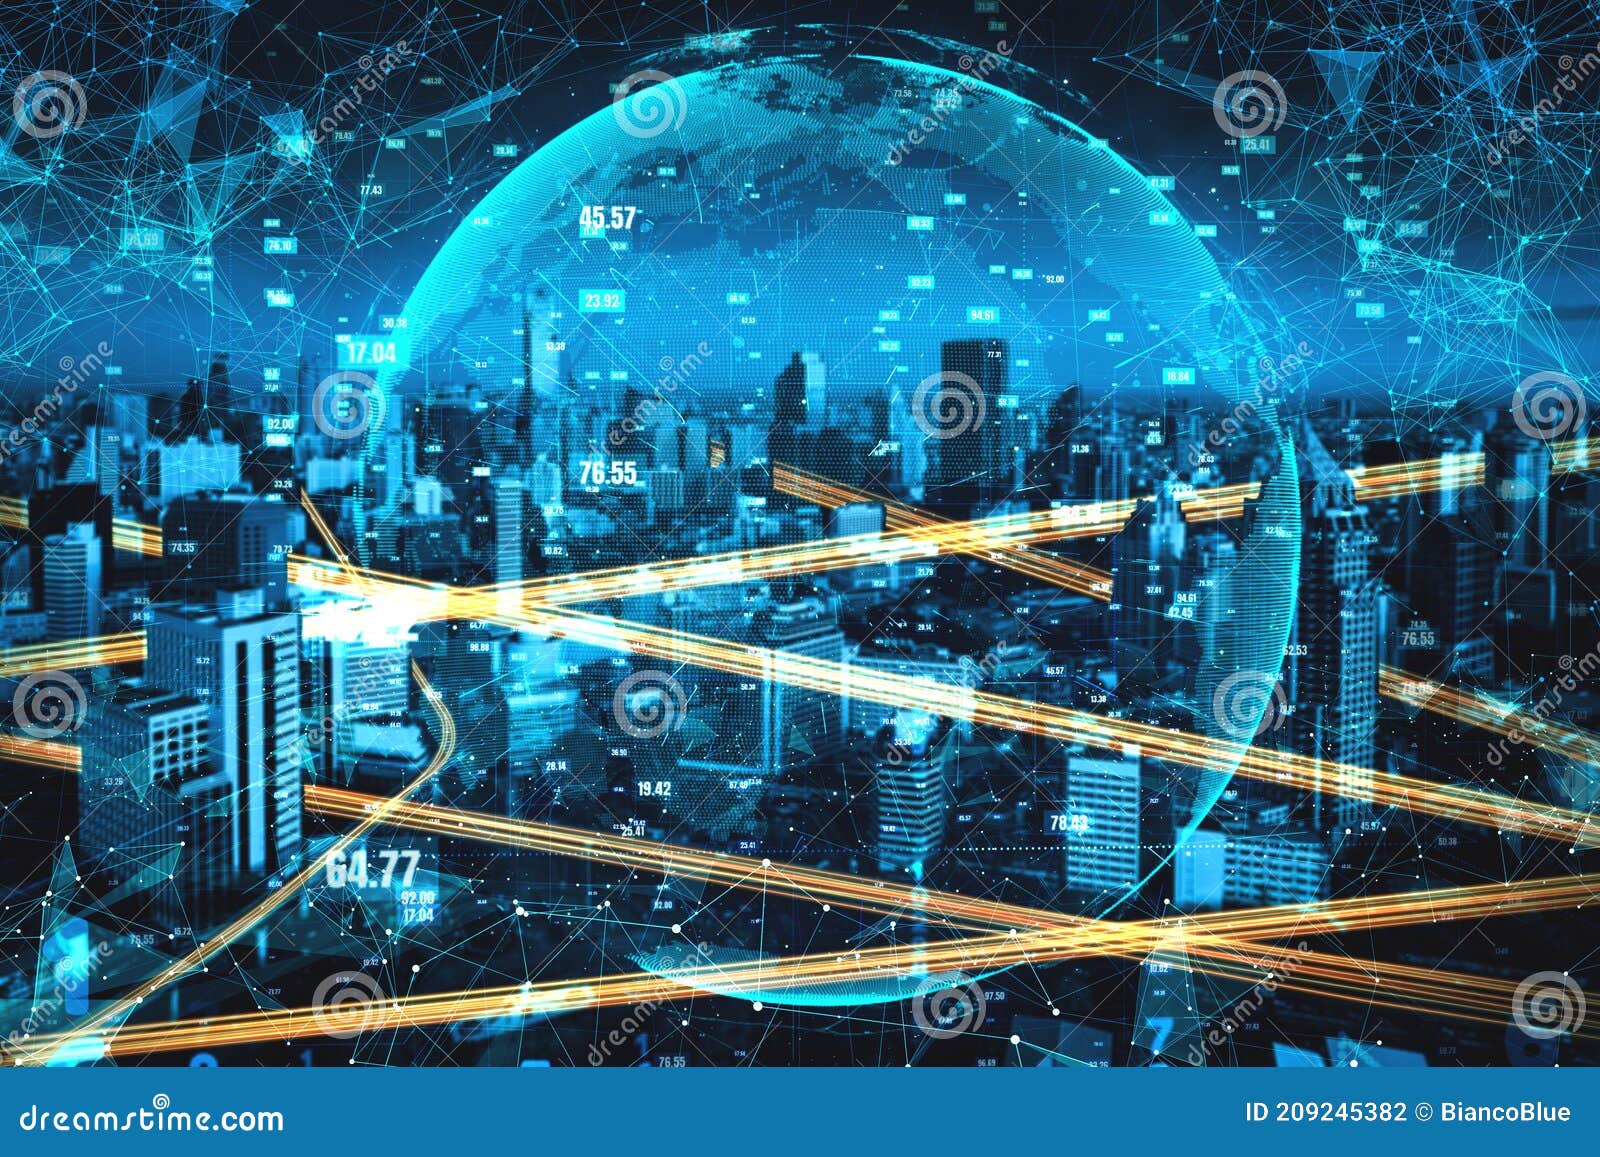 smart city technology with futuristic graphic of digital data transfer